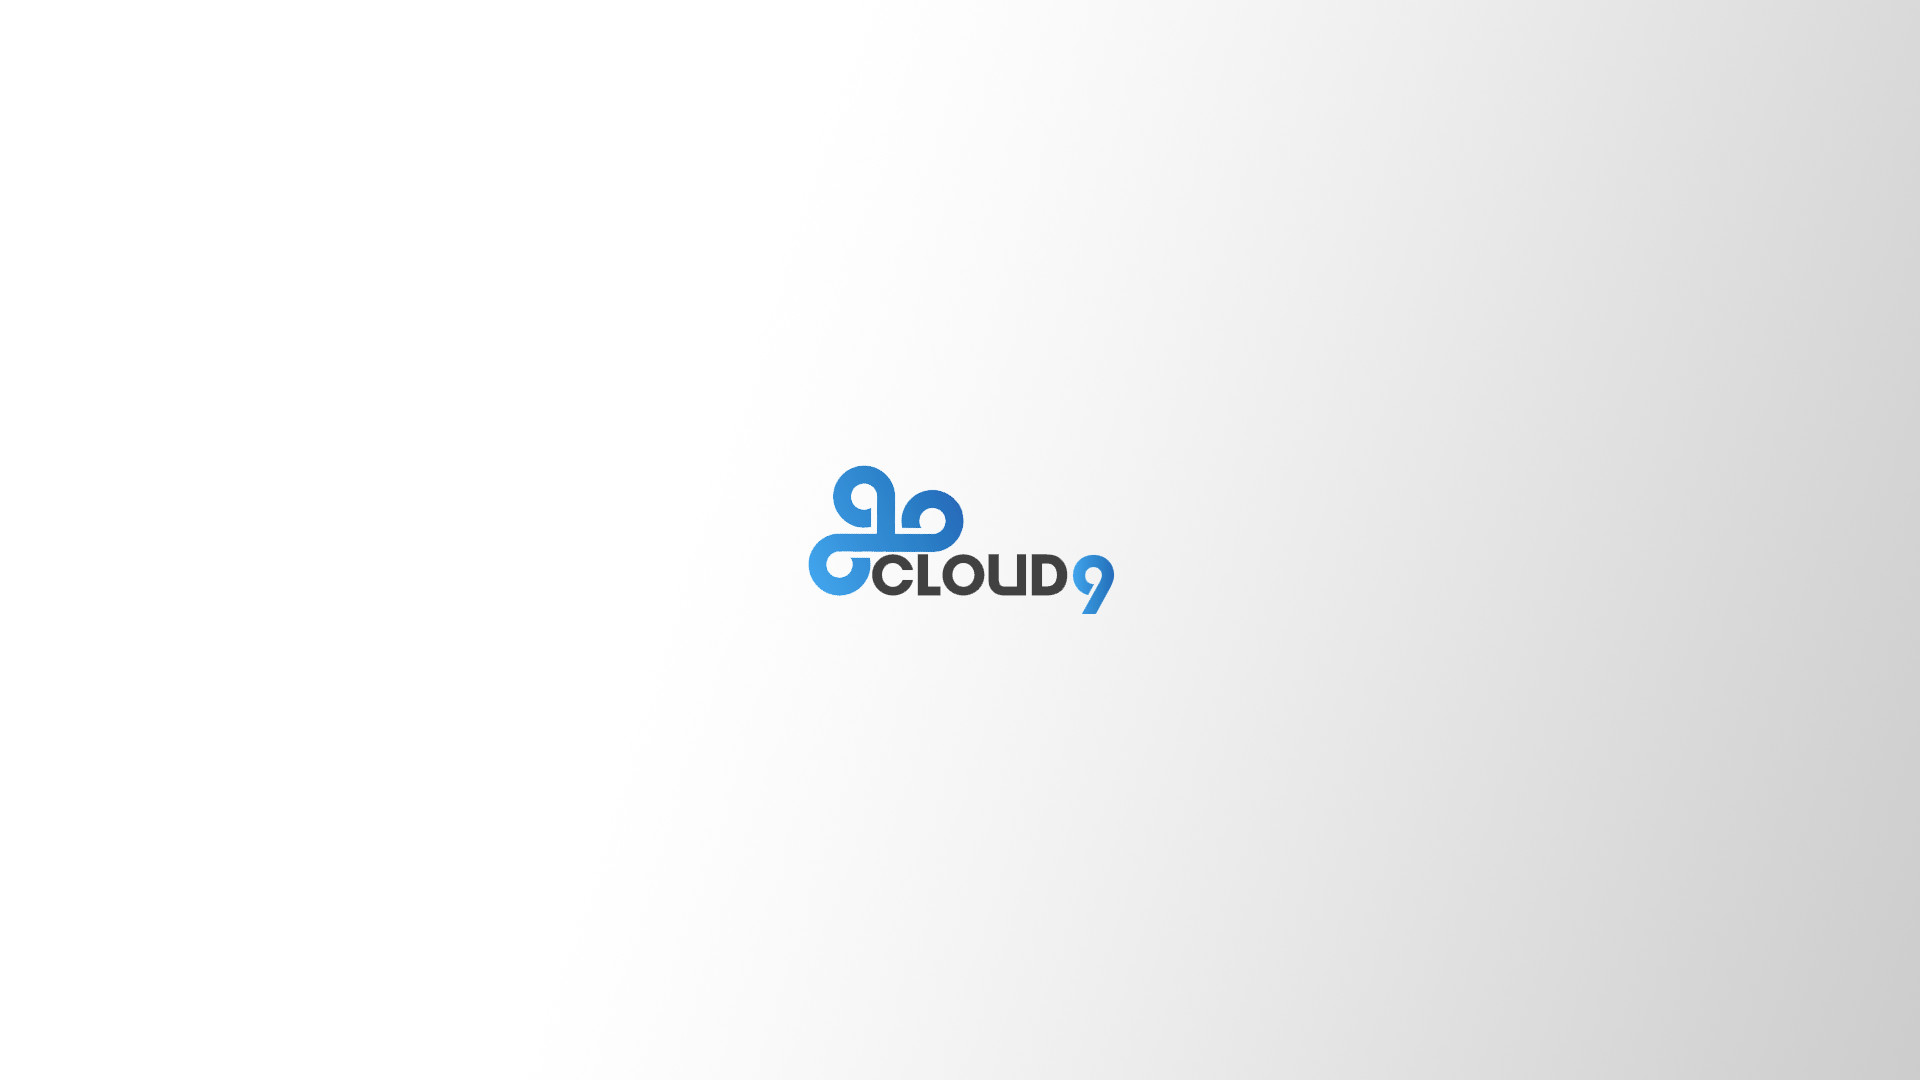 1920x1080 A Cloud9 wallpaper thing I made.